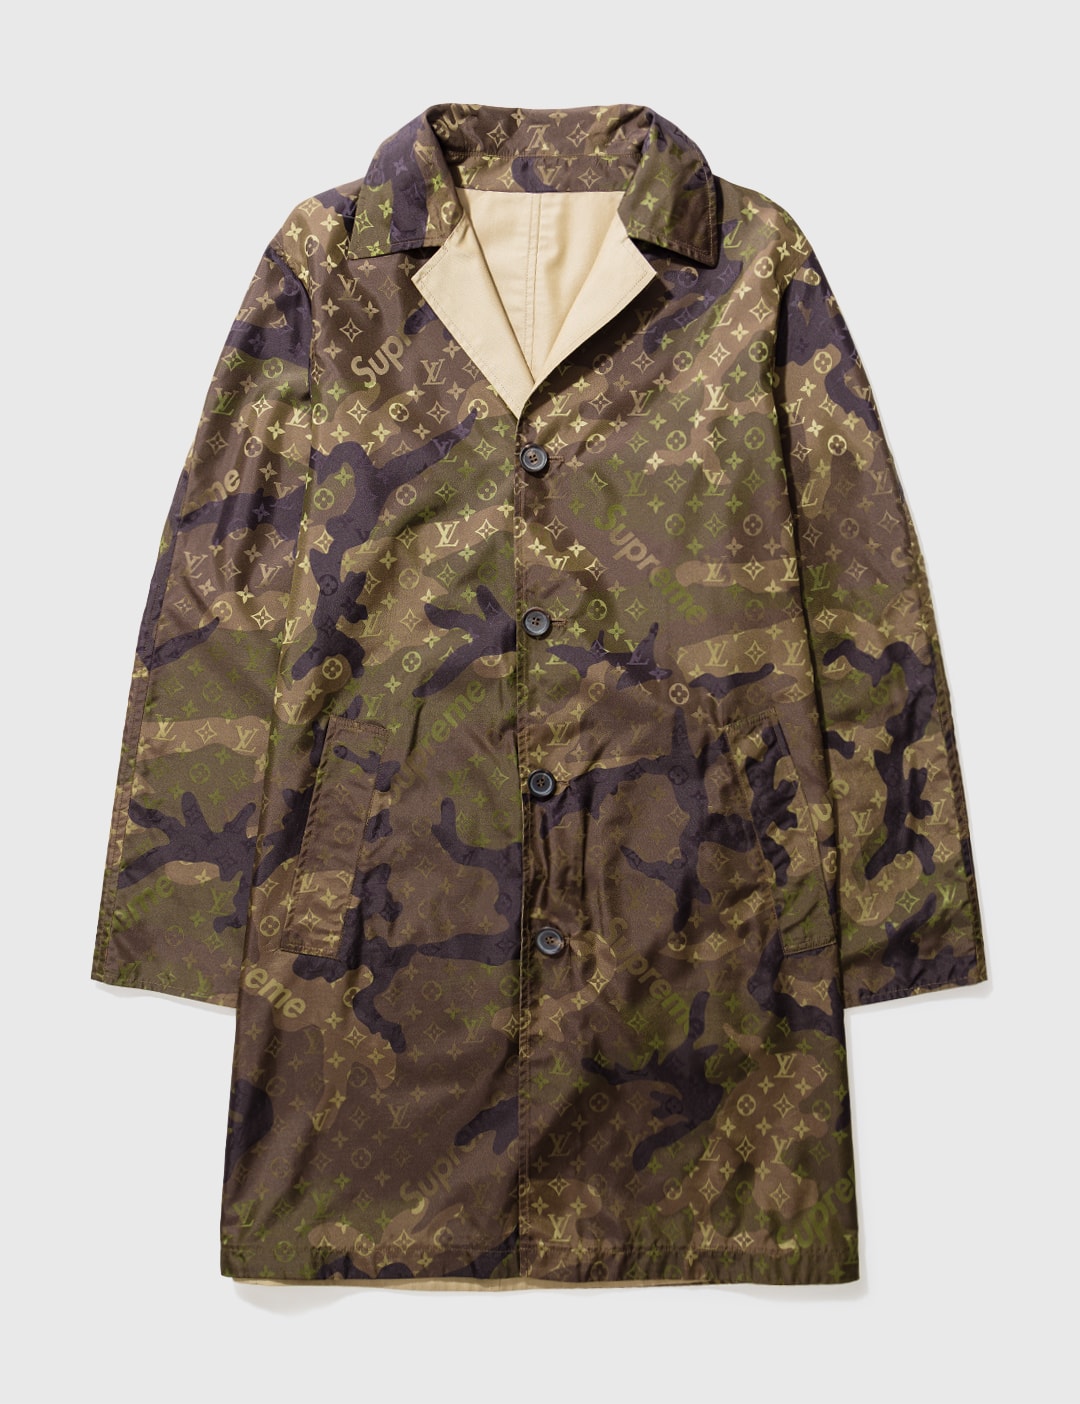 Dior x Stussy Monogram Reversible Trench coat one of one